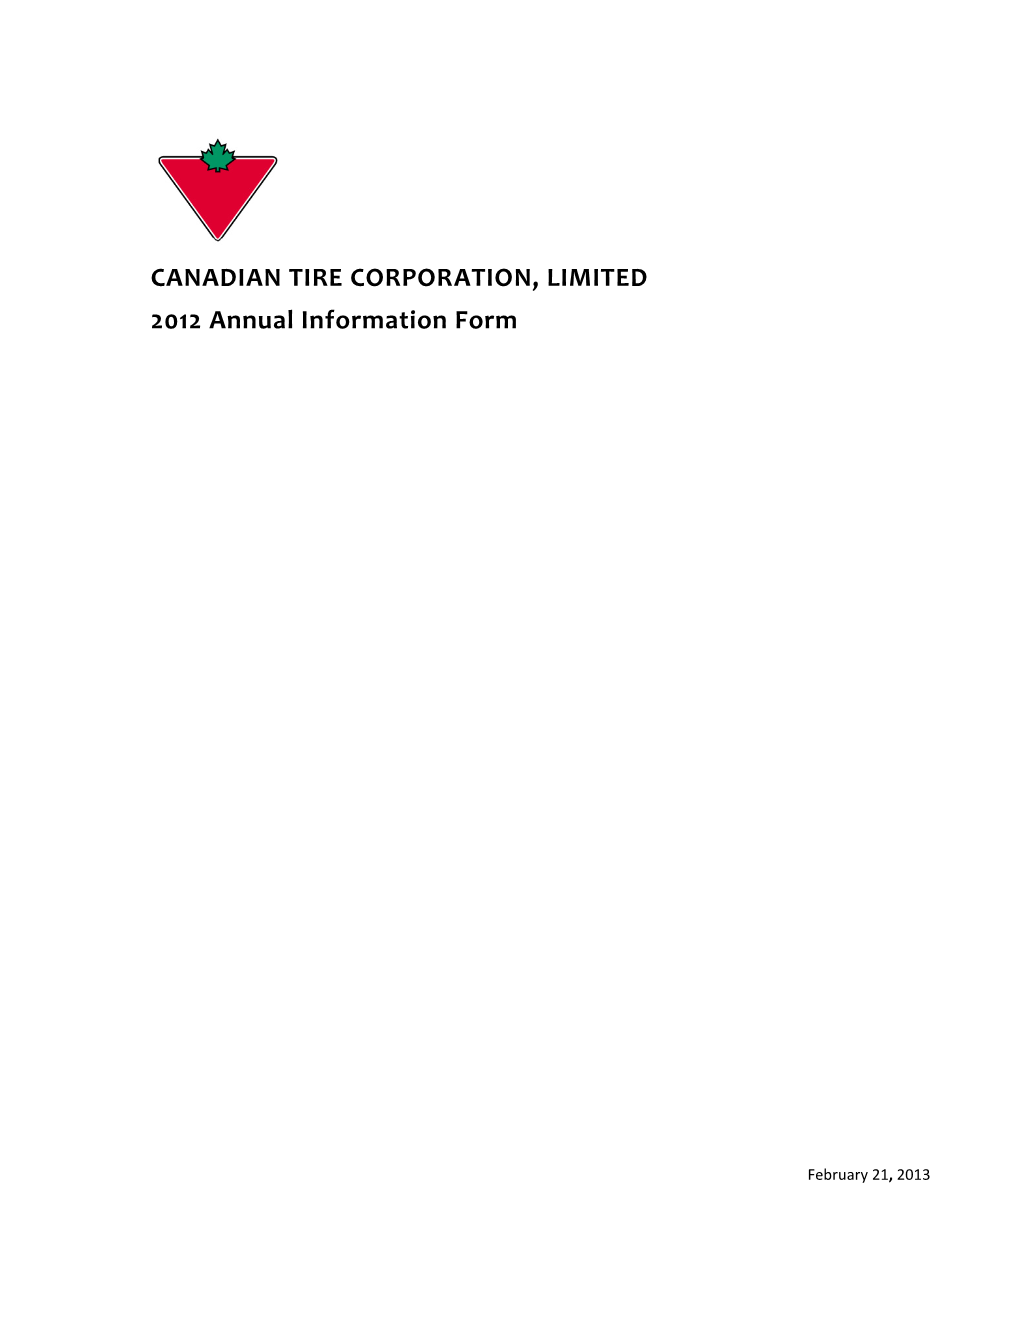 Annual Information Form Canadian Tire Corporation, Limited Table of Contents